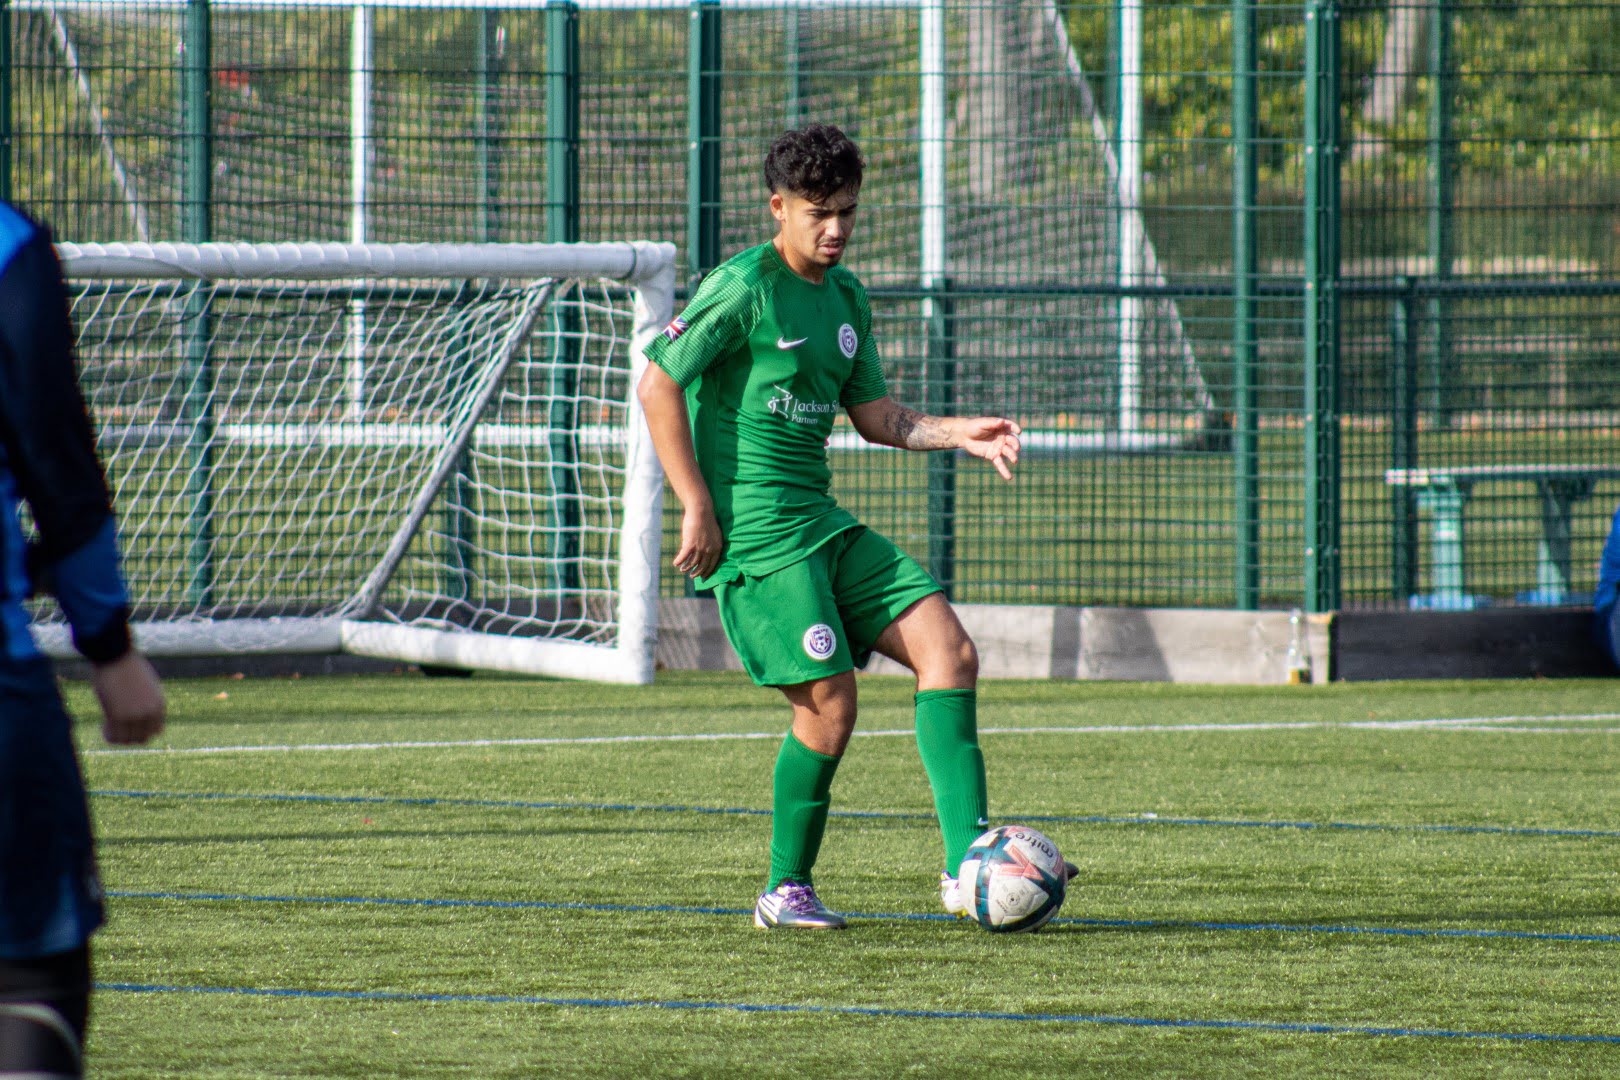 A soccer player in green attire controls the ball on an artificial pitch with a goal and fence in the background and another player partially visible.